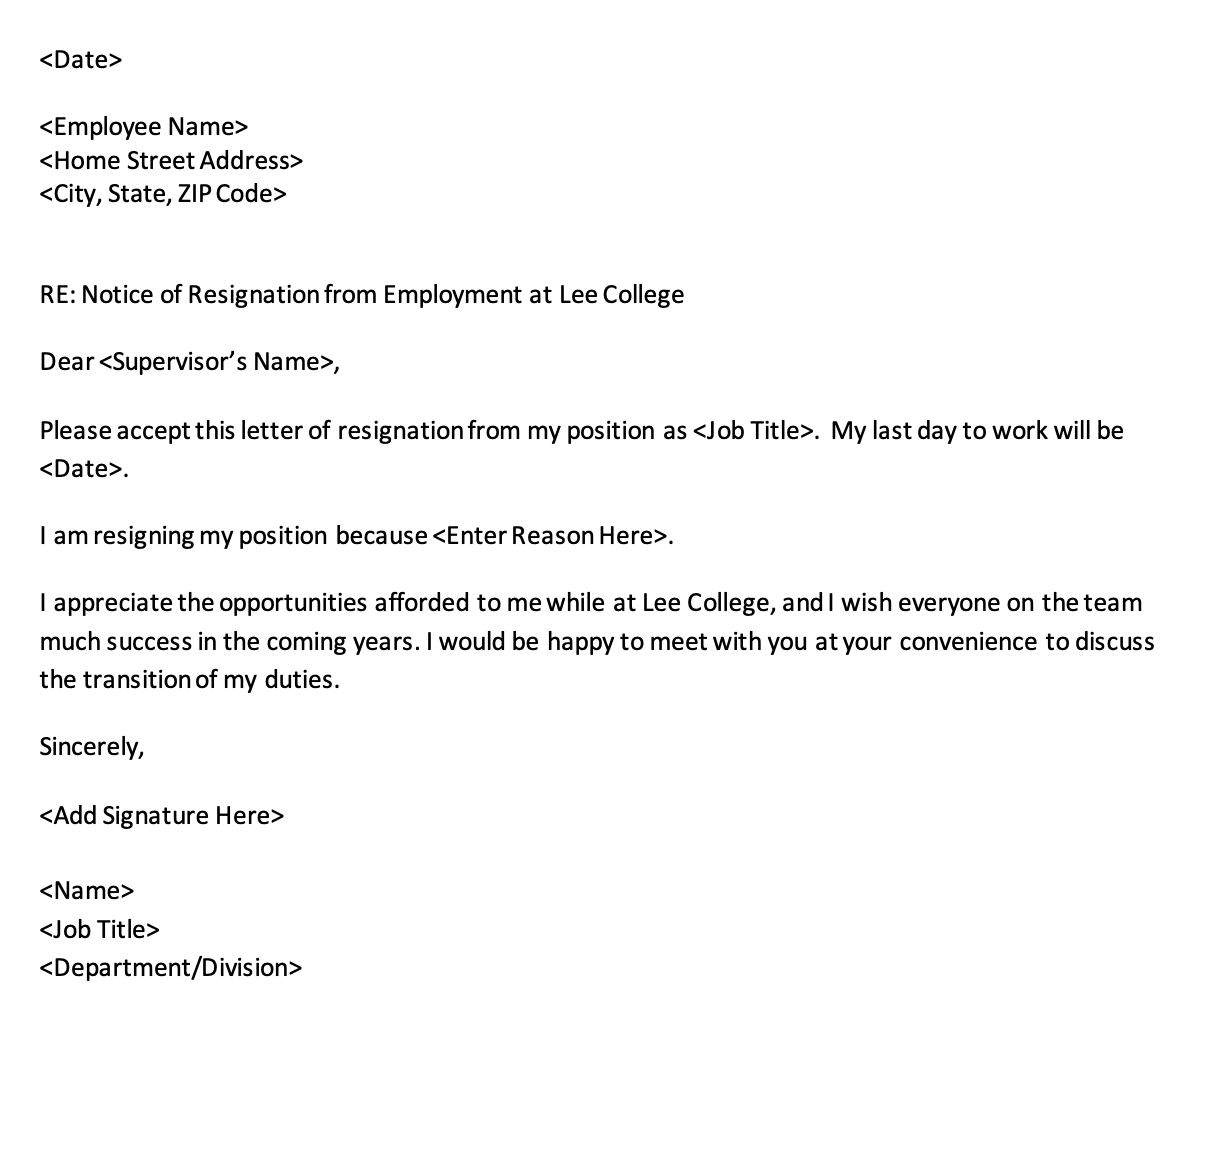 How to Write a Respectable Resignation Letter [+Samples & Templates]